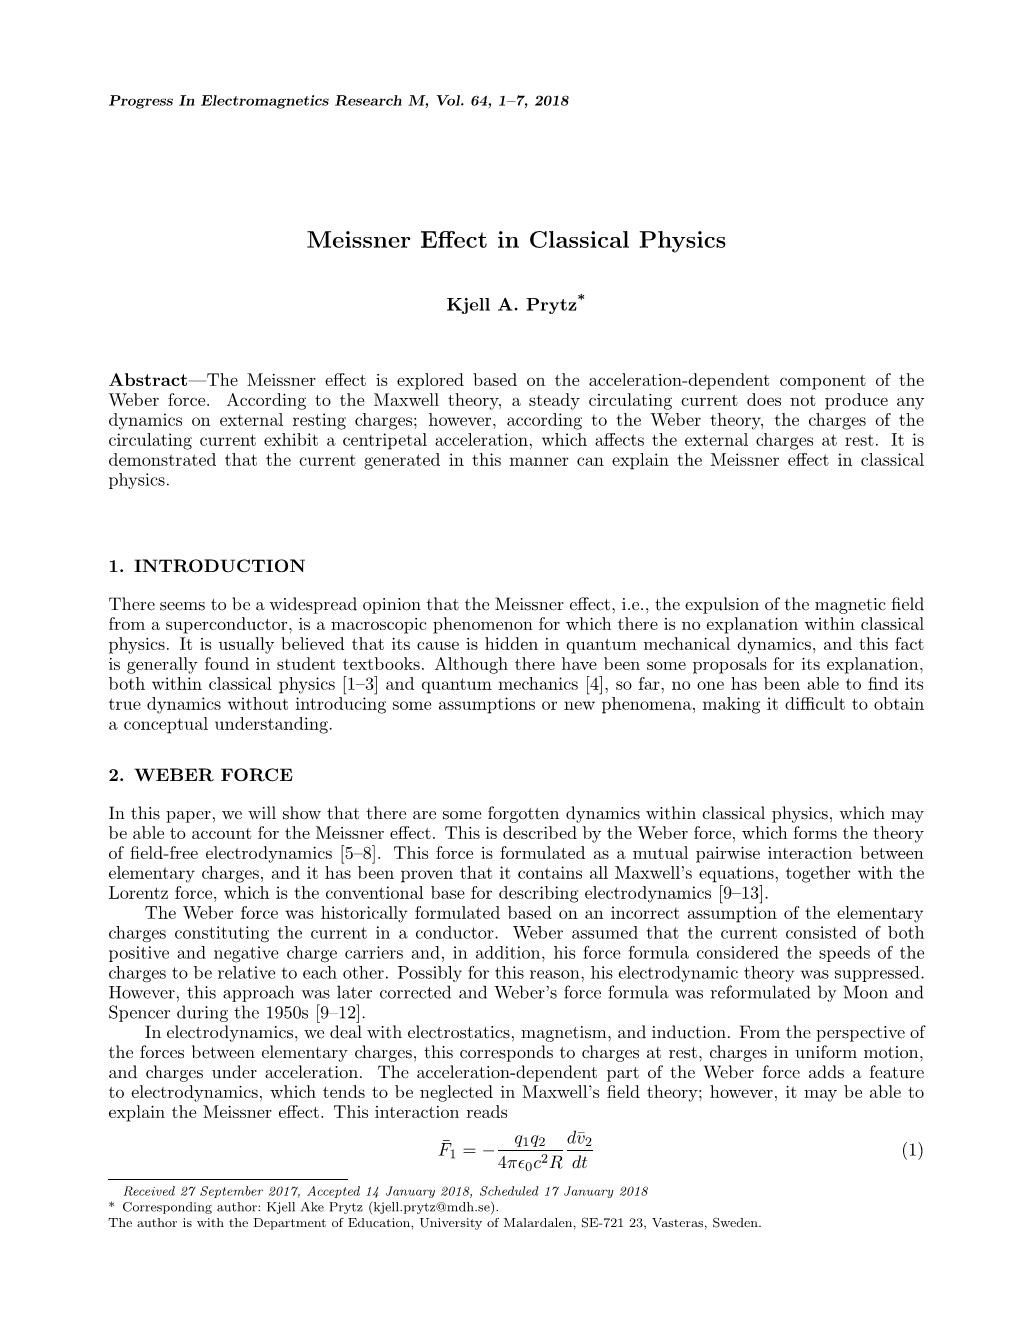 Meissner Effect in Classical Physics